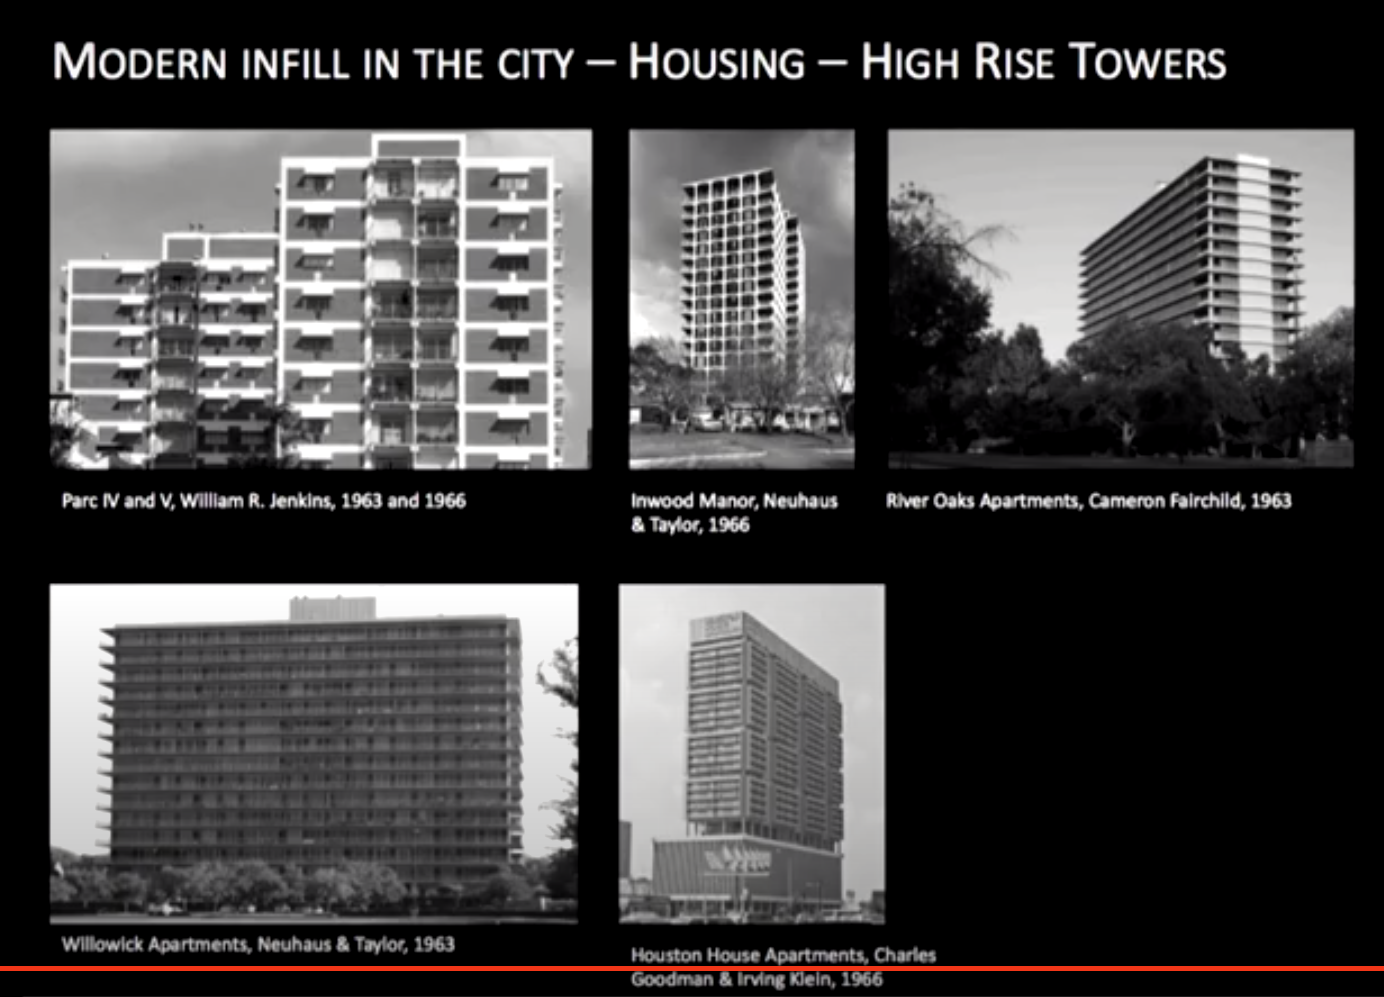 Photos of high rises: Parc IV and V (1963, 1966), Inwood Manor (1966), River Oak Apartments (1963).